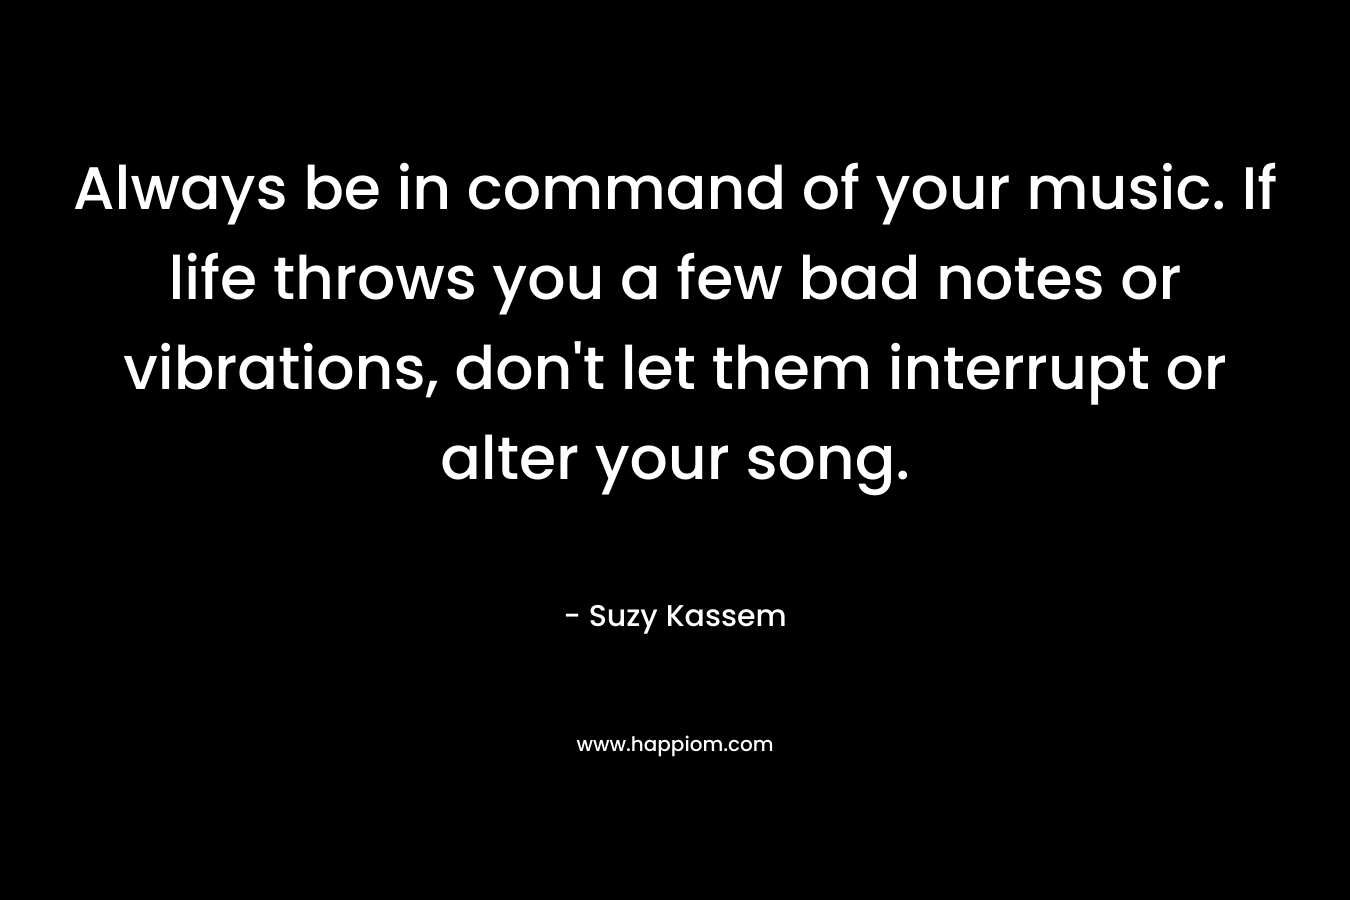 Always be in command of your music. If life throws you a few bad notes or vibrations, don’t let them interrupt or alter your song. – Suzy Kassem